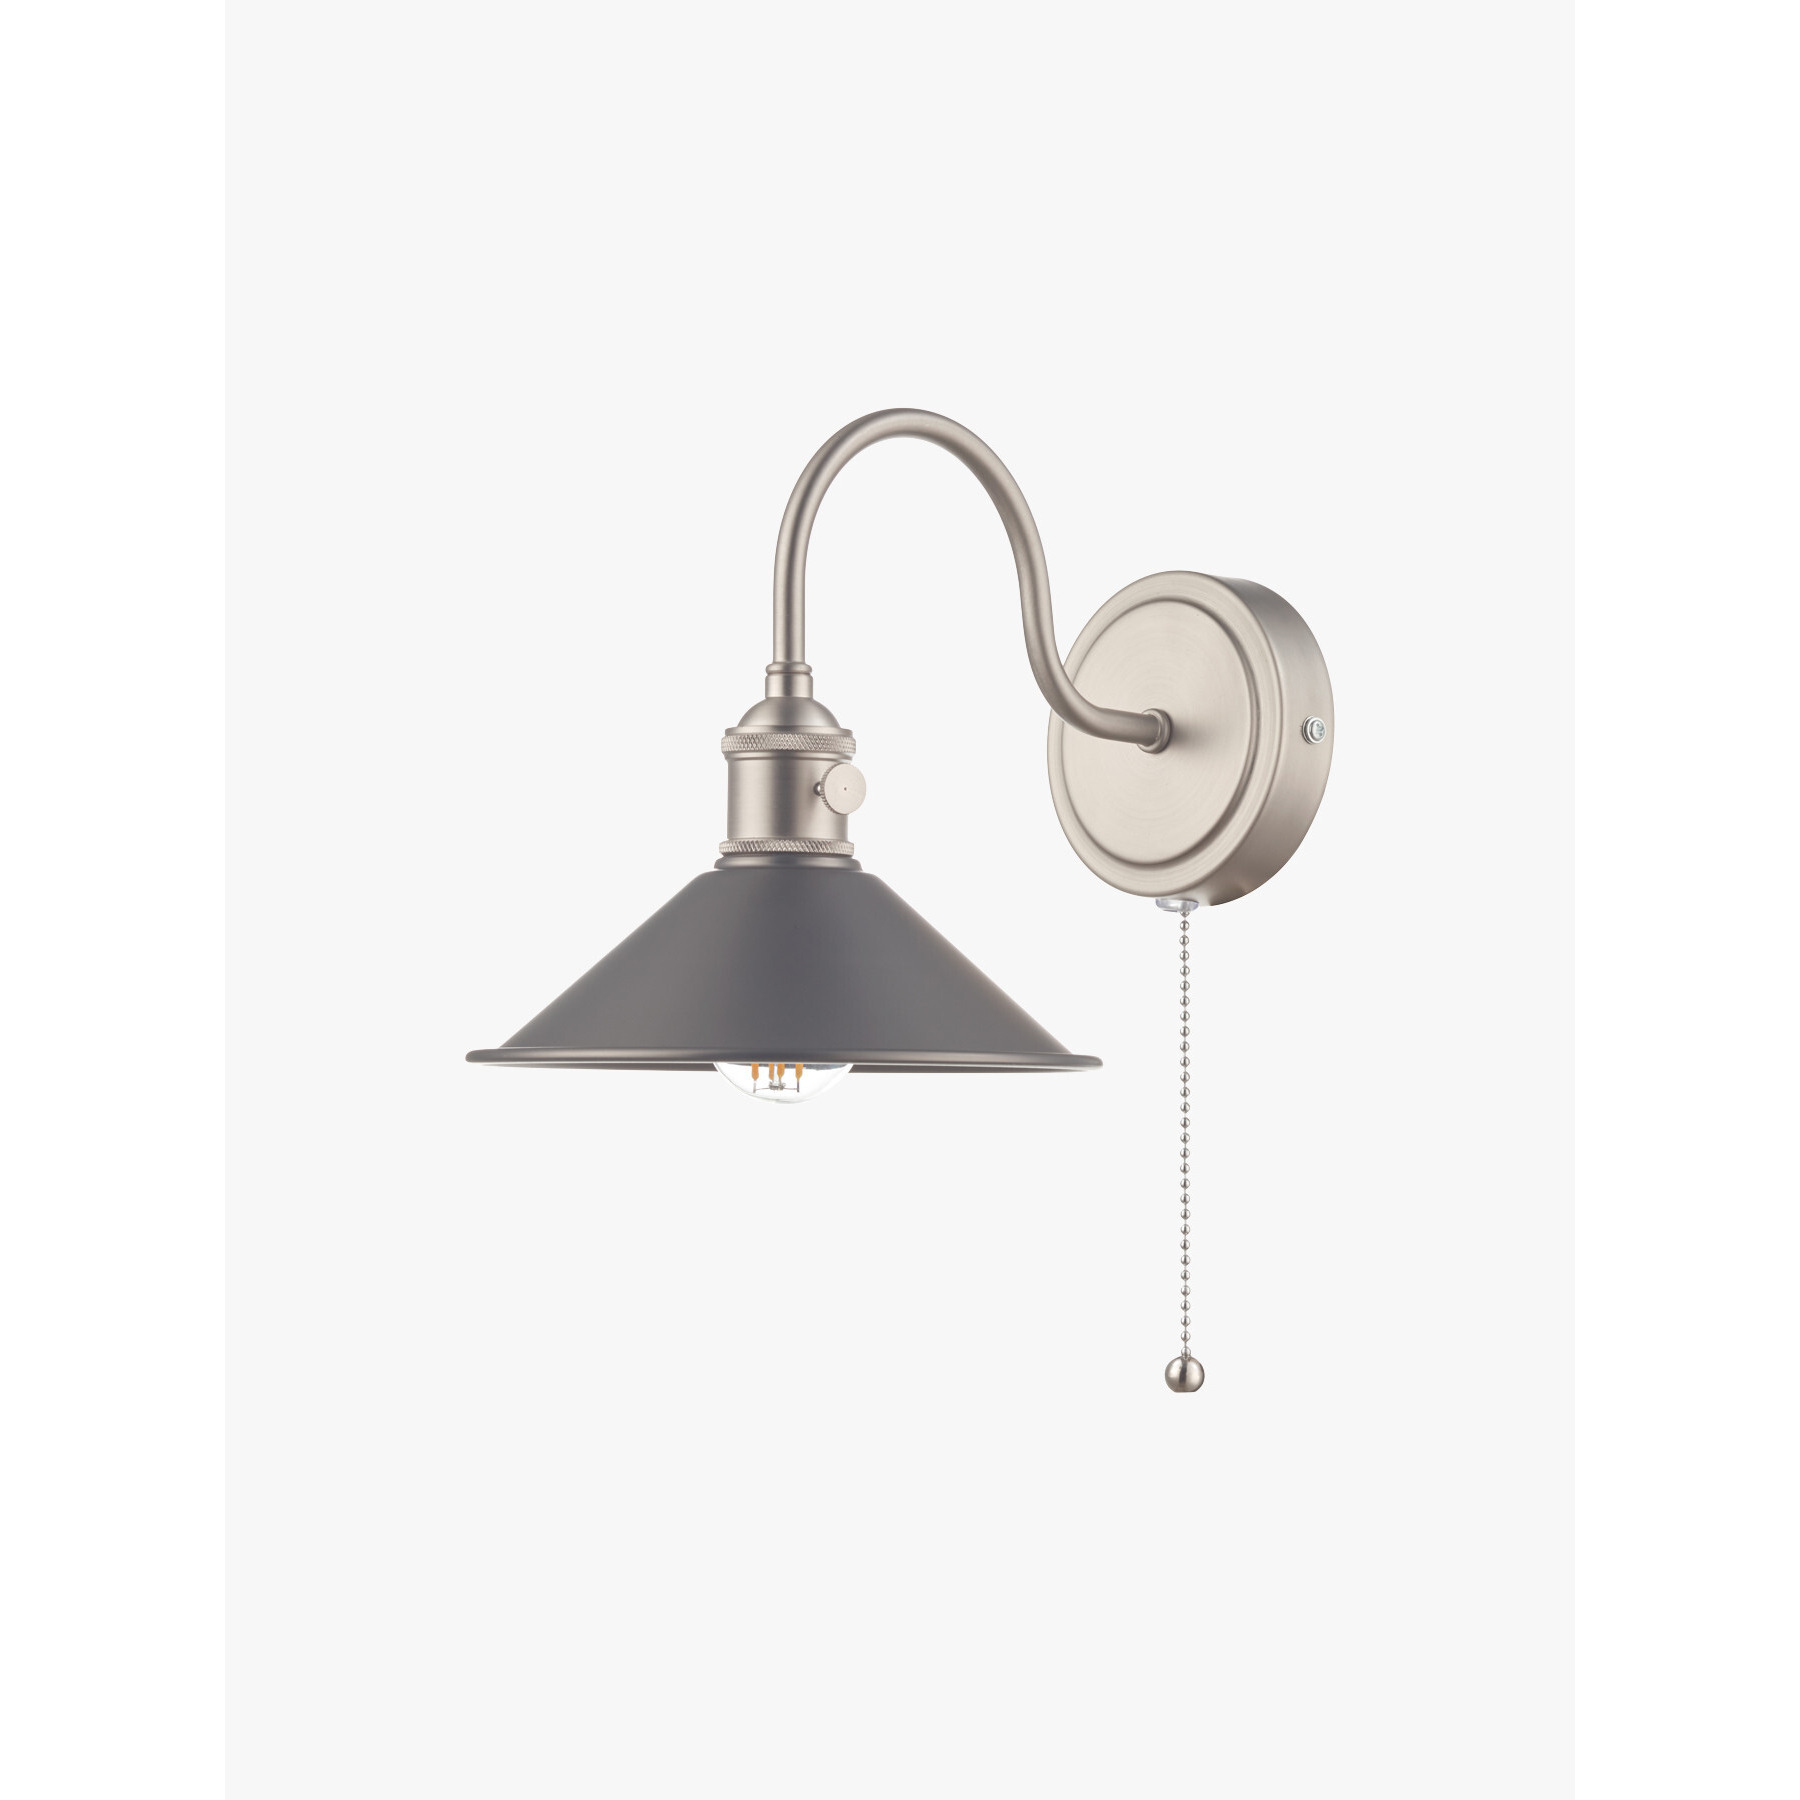 Dar Lighting Hadano Wall Light -  Antique Chrome with Antique Pewter Shade Silver - image 1